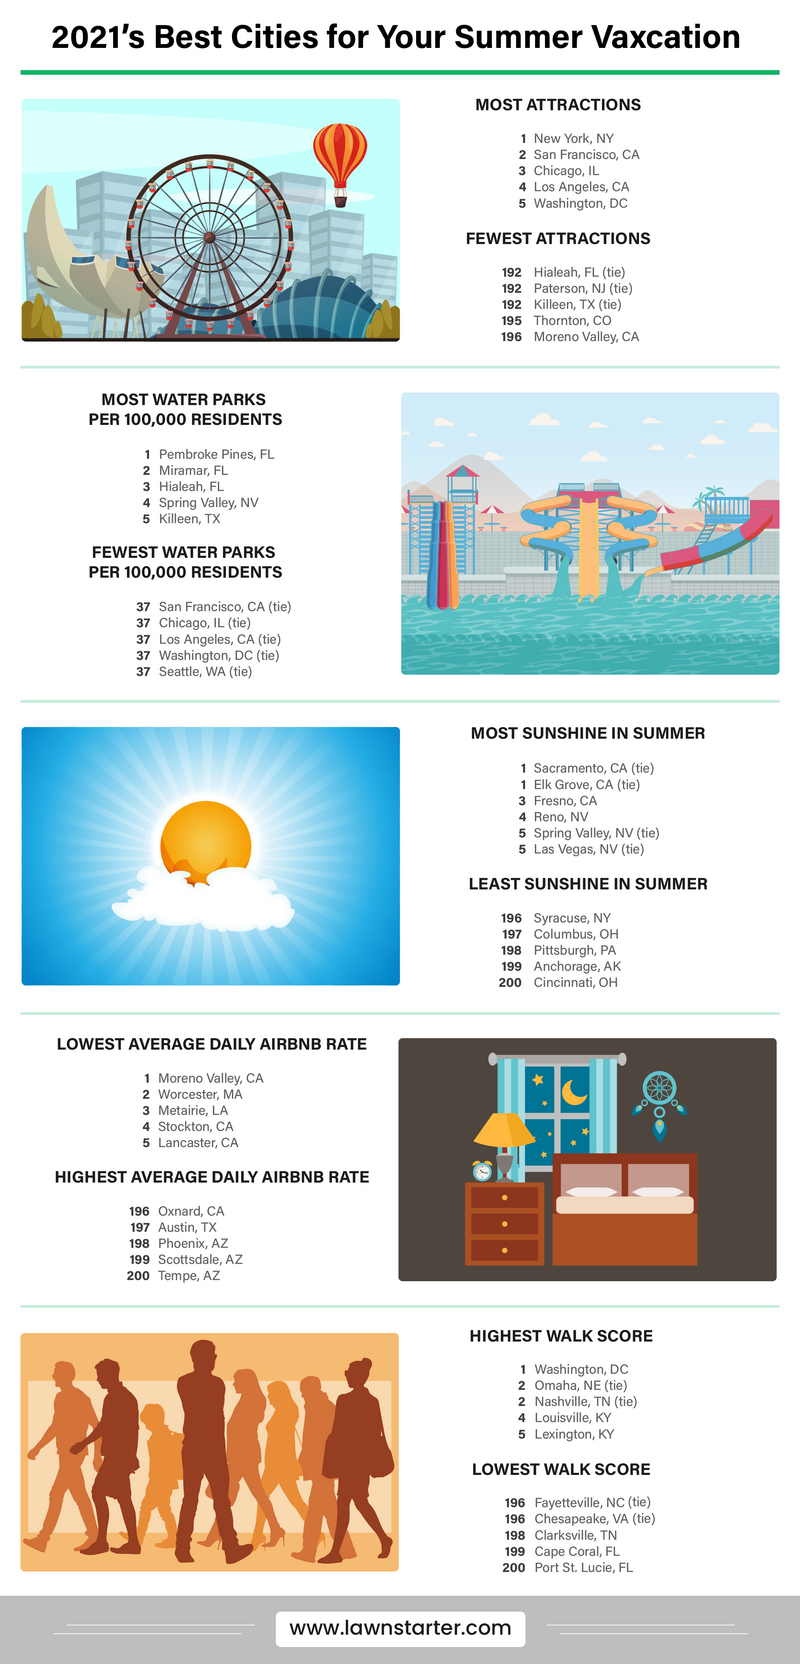 Infrographic depicting the best and worst cities for a summer vaxcation